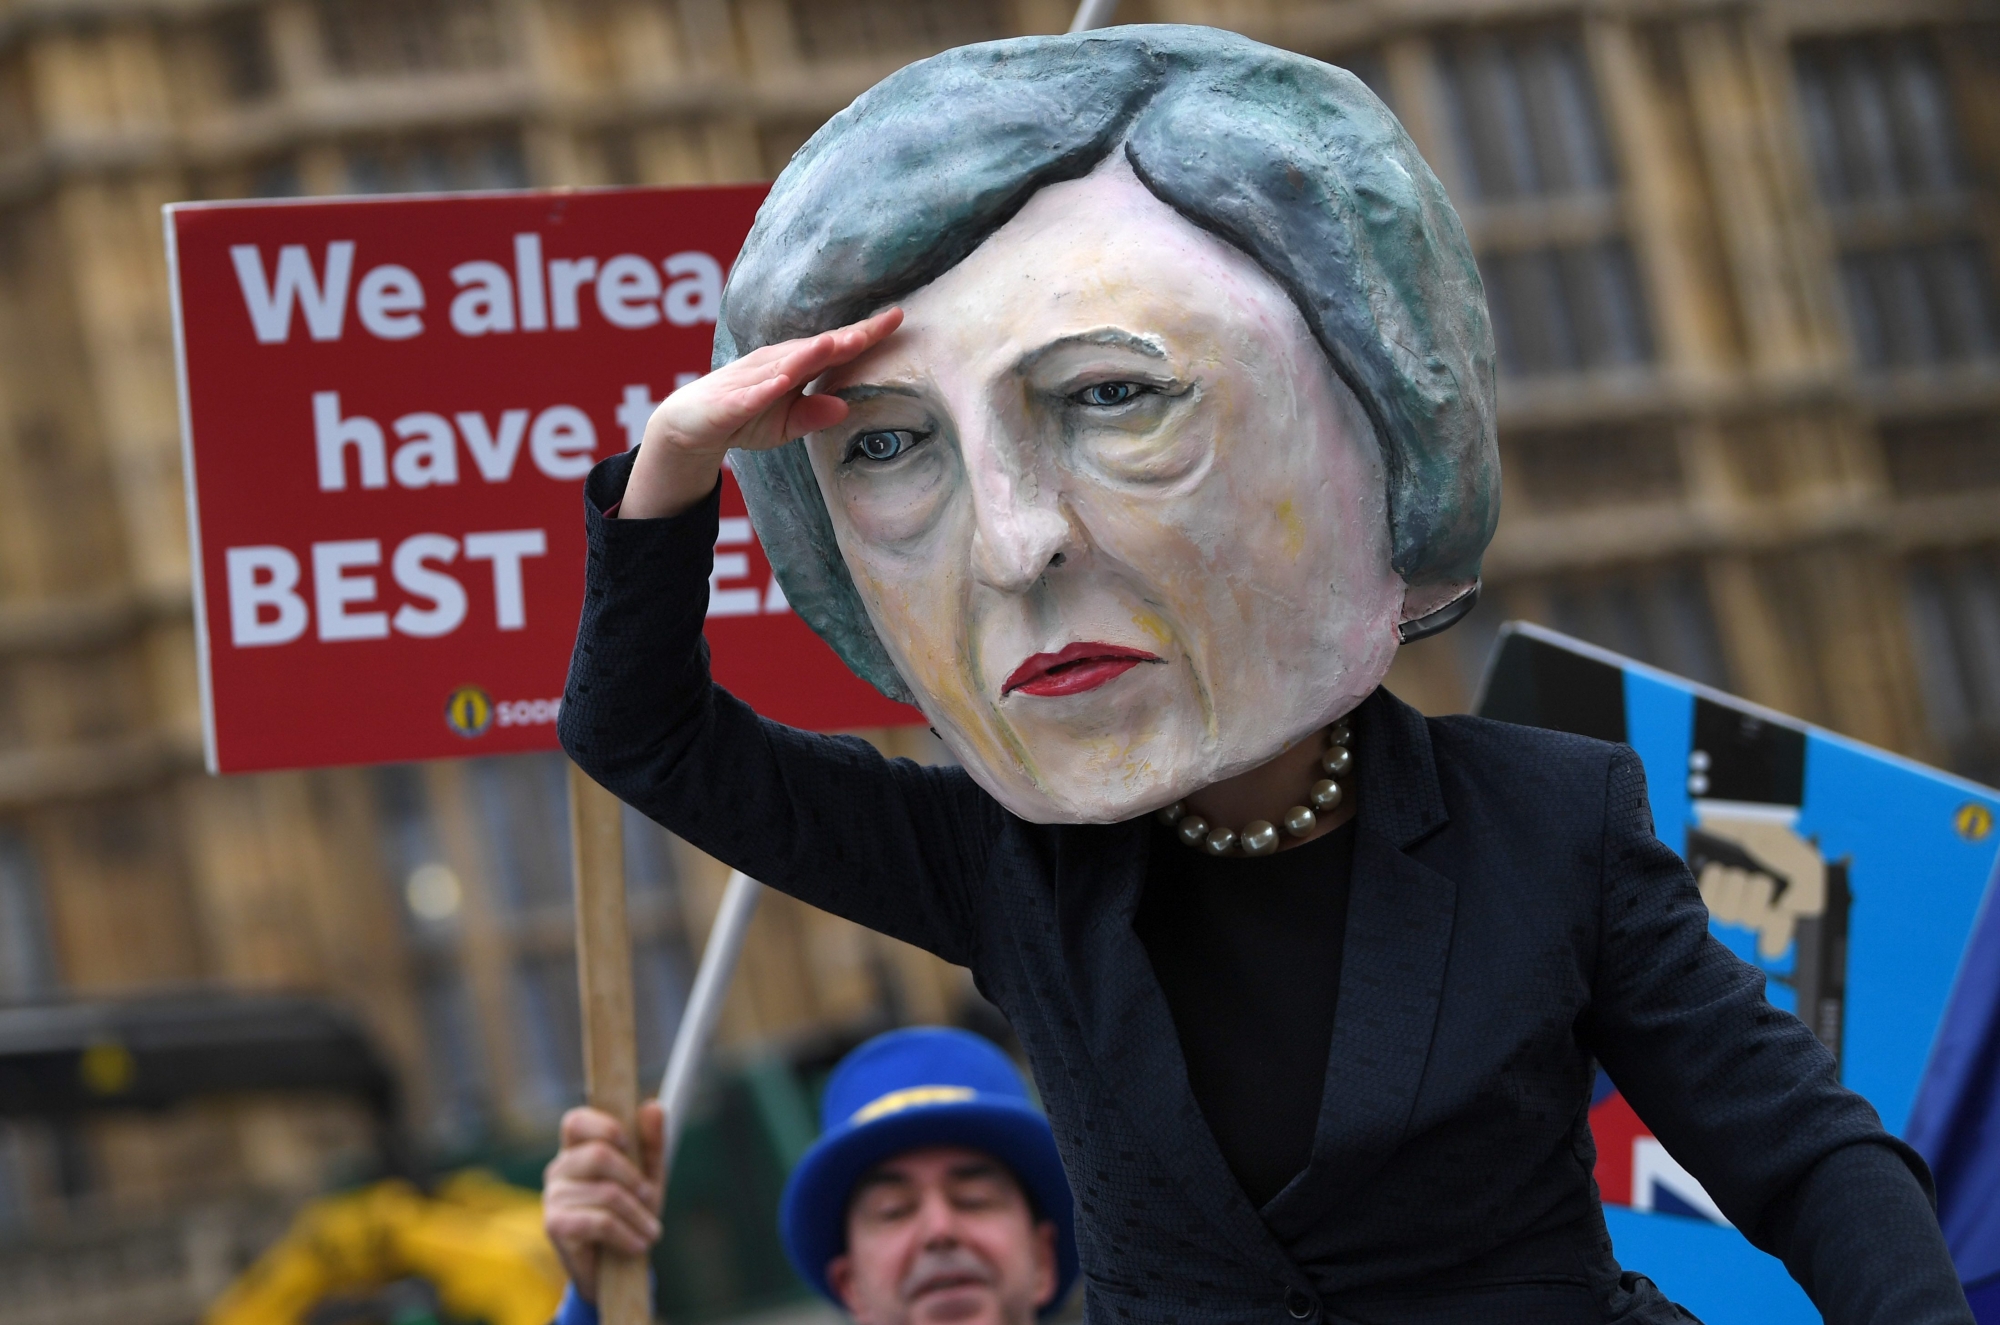 epa07286340 An anti-Brexit protester dressed in a Theresa May costume recreates a scene from the 1997 film 'Titanic, in London, Britain, 15 January 2019. Parliamentarians are voting on the postponed Brexit EU Withdrawal Agreement, commonly known as The Meaningful Vote, deciding on Britain's future relationship with the European Union.  EPA/NEIL HALL BRITAIN BREXIT VOTE